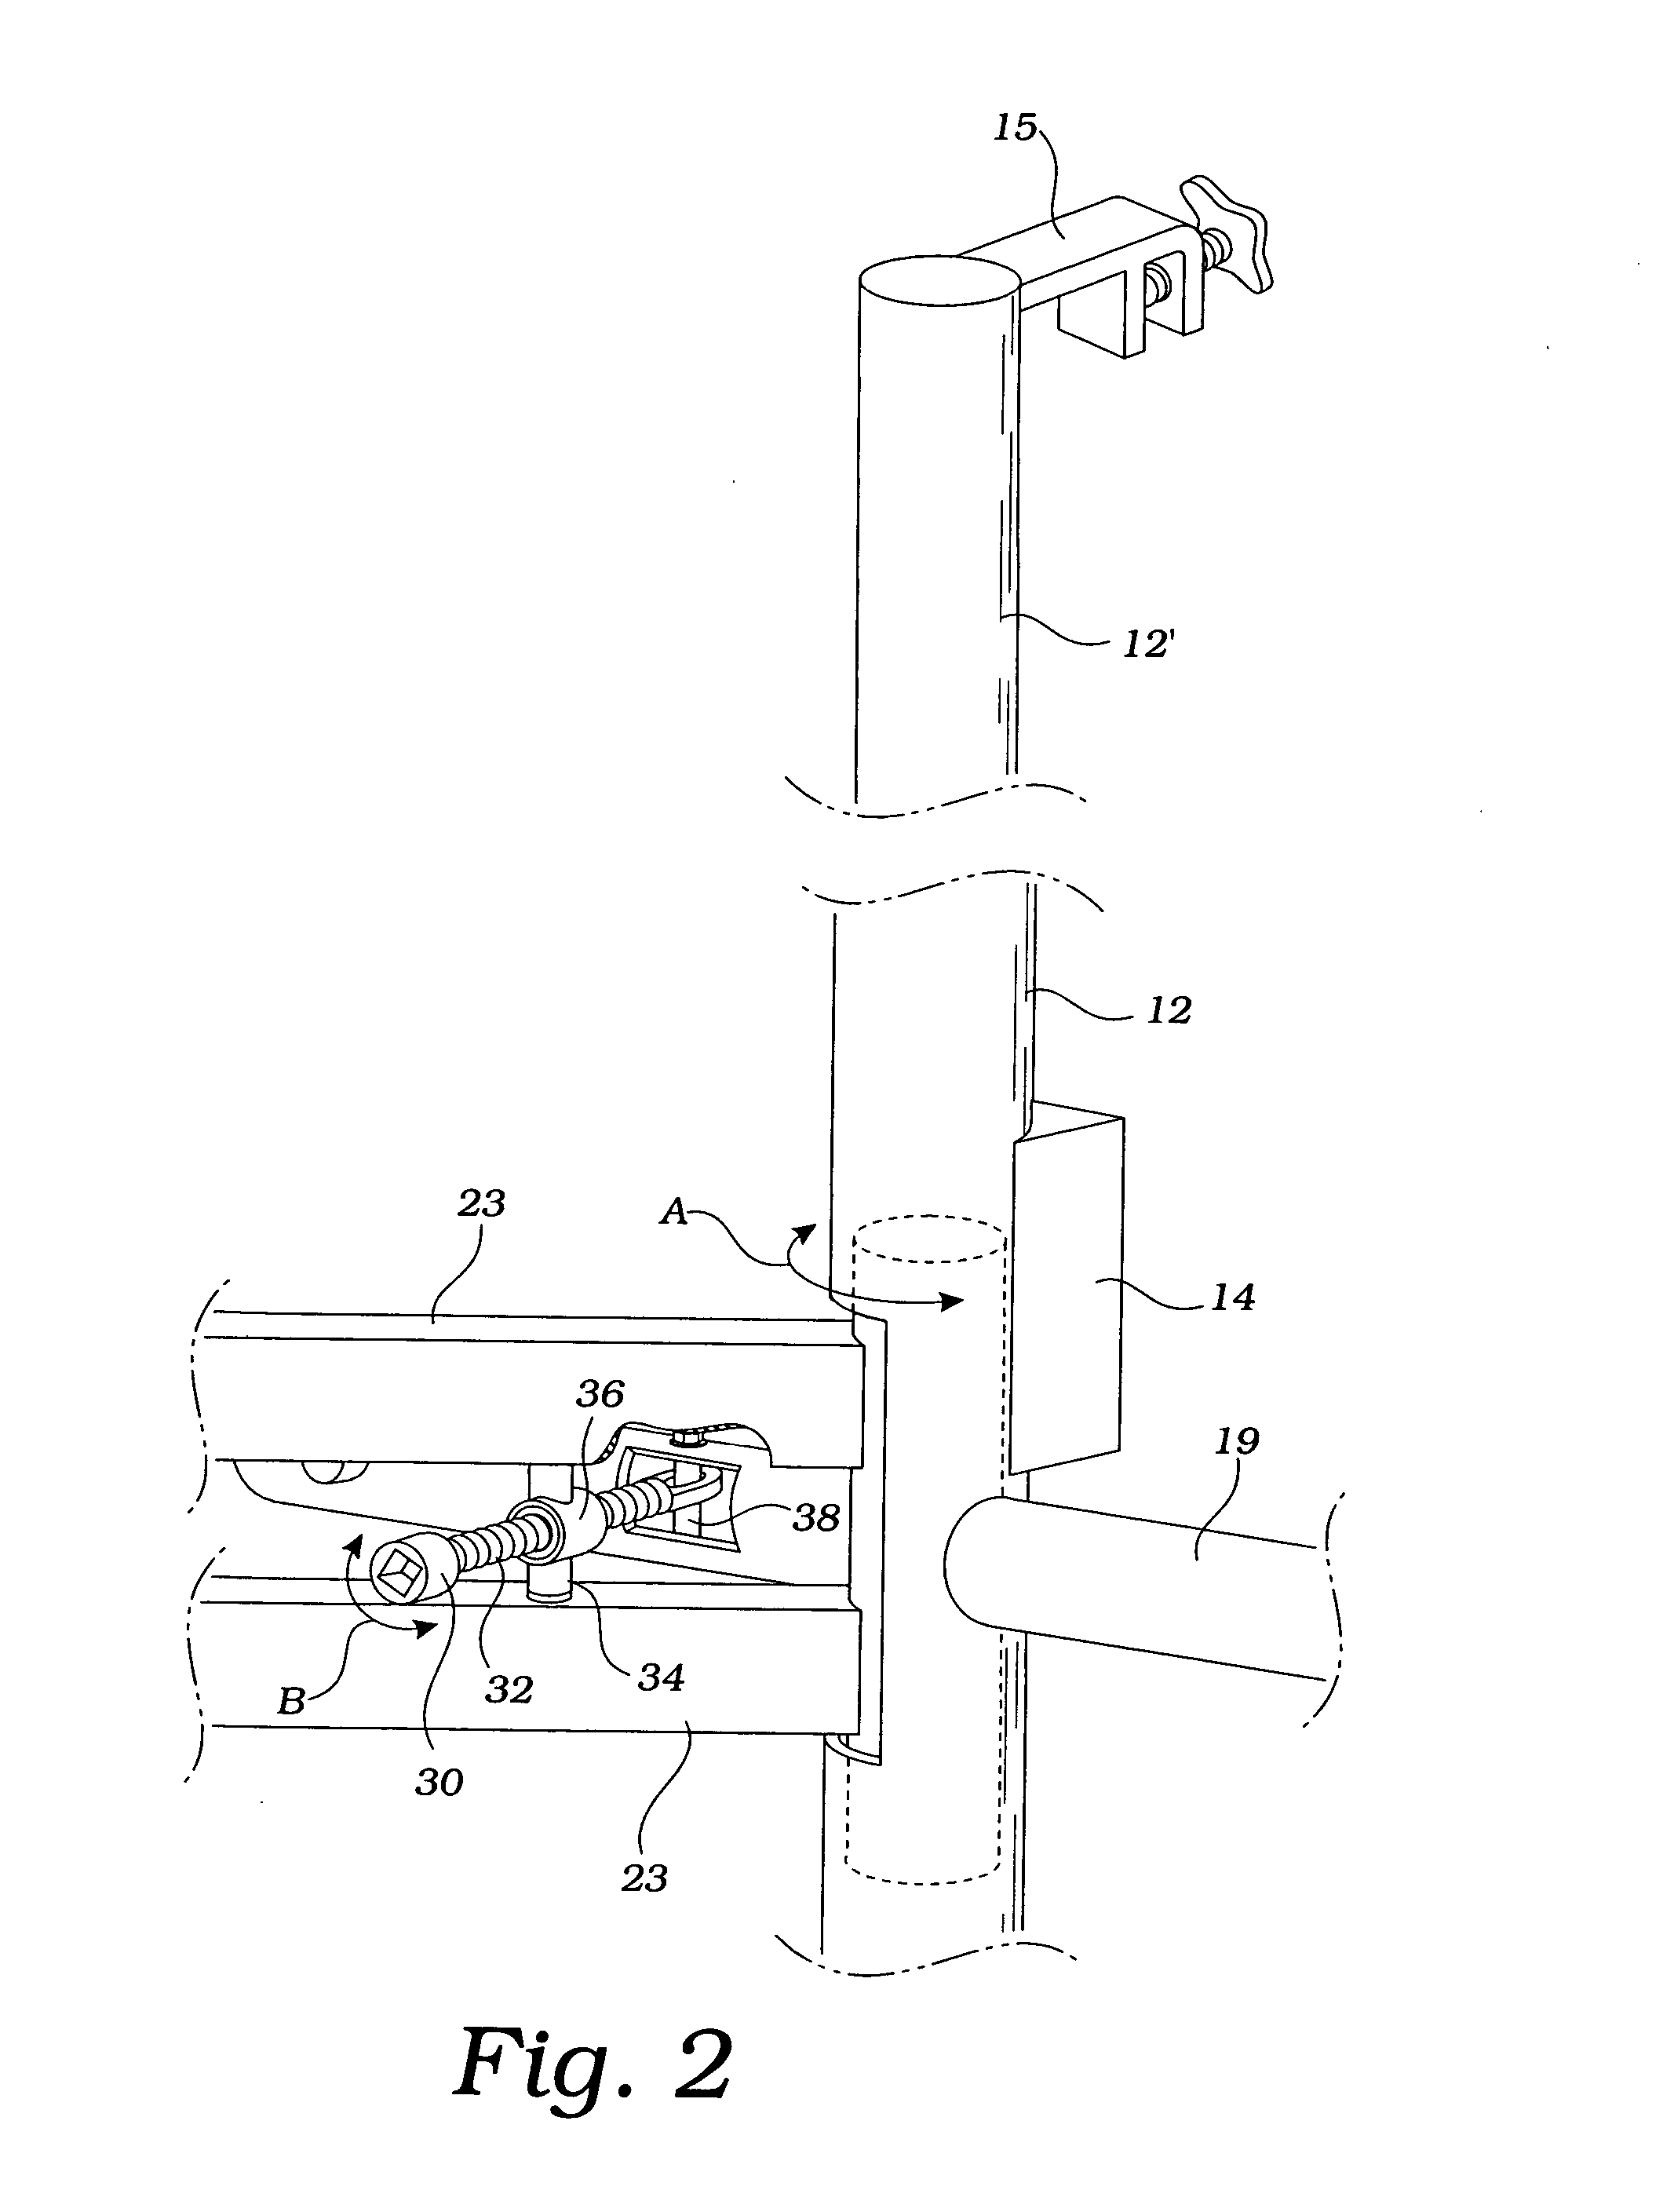 Vehicle exterior material clamping apparatus with scissors-like closure motion